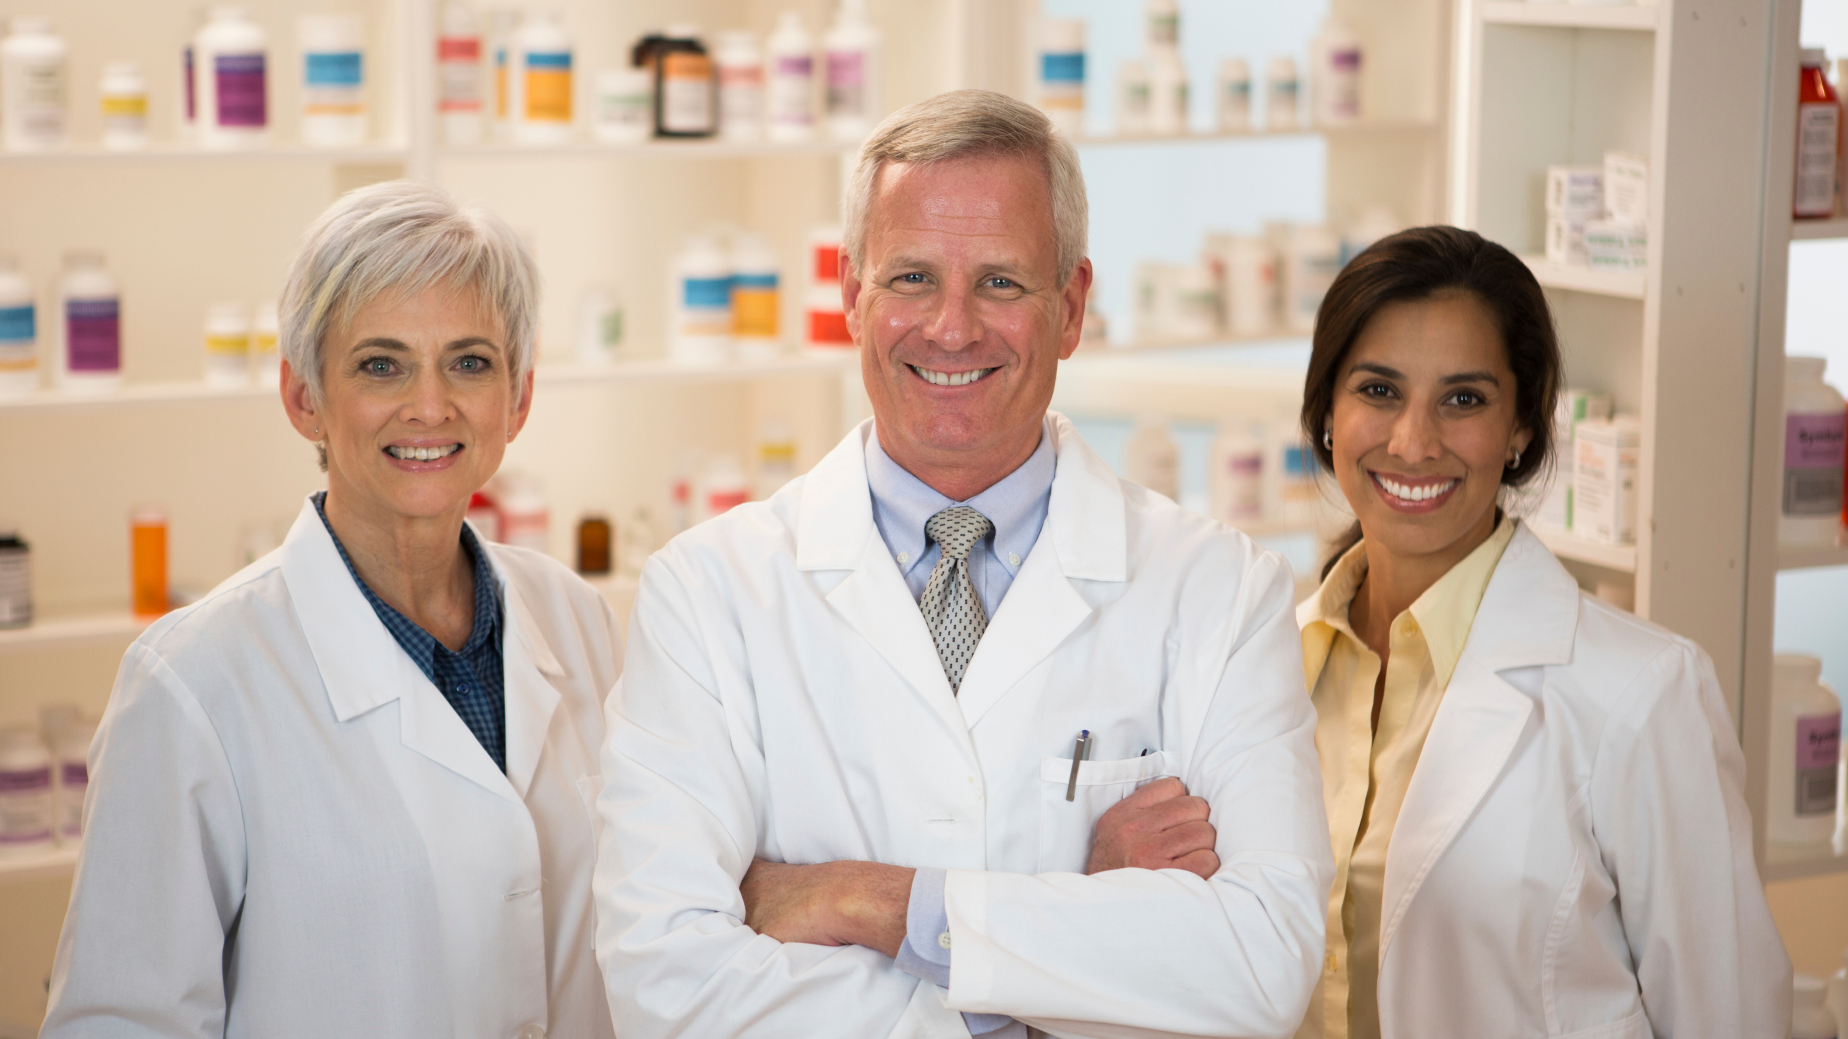 HHS: Pharmacists Are Nationally Authorized to Administer COVID-19 Tests Under PREP ACT